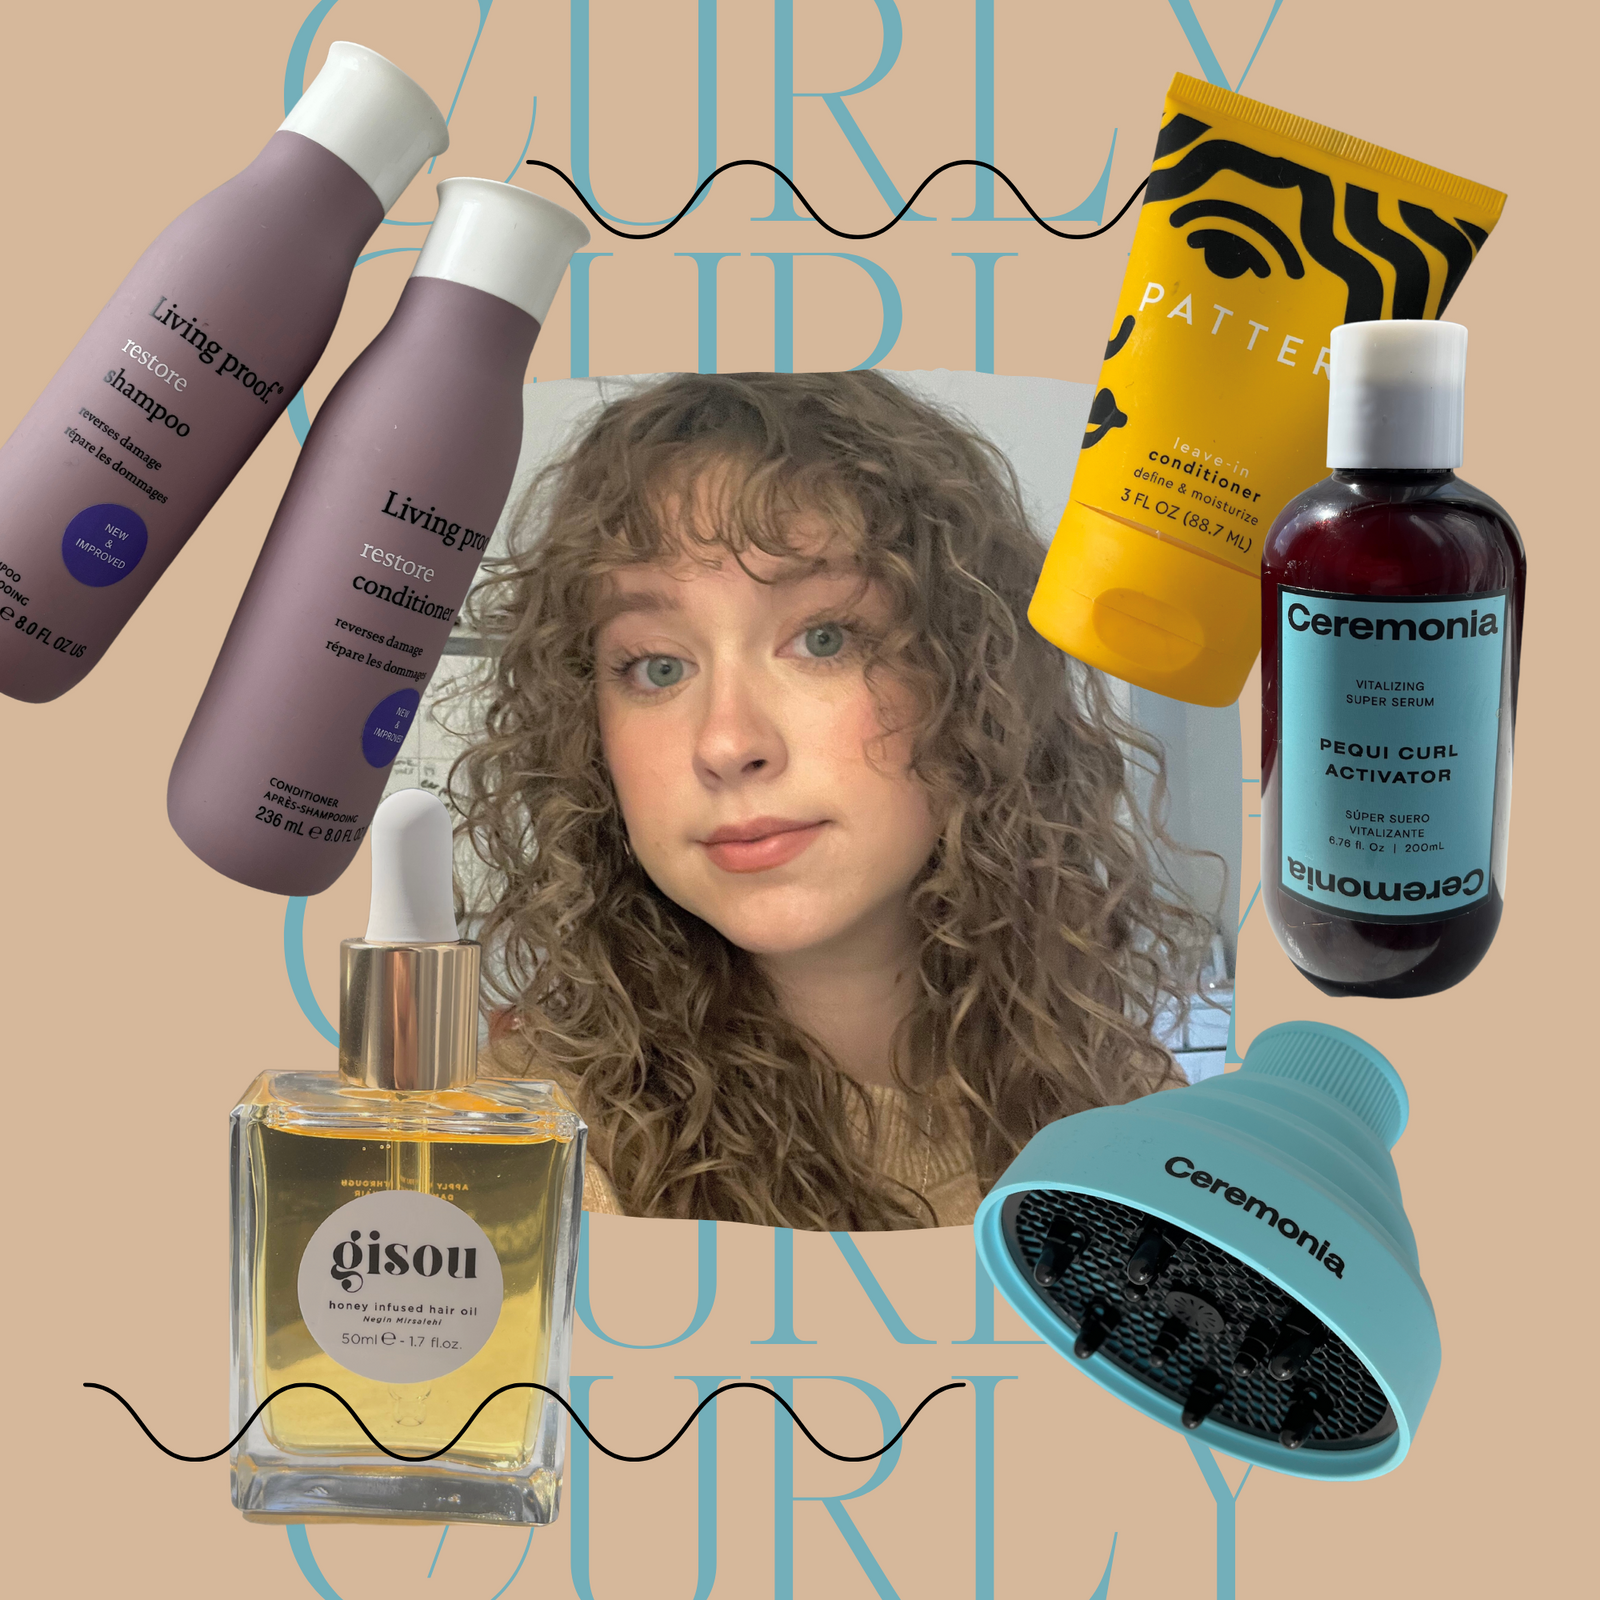 Curly haired woman surrounded by hair products on a tan background